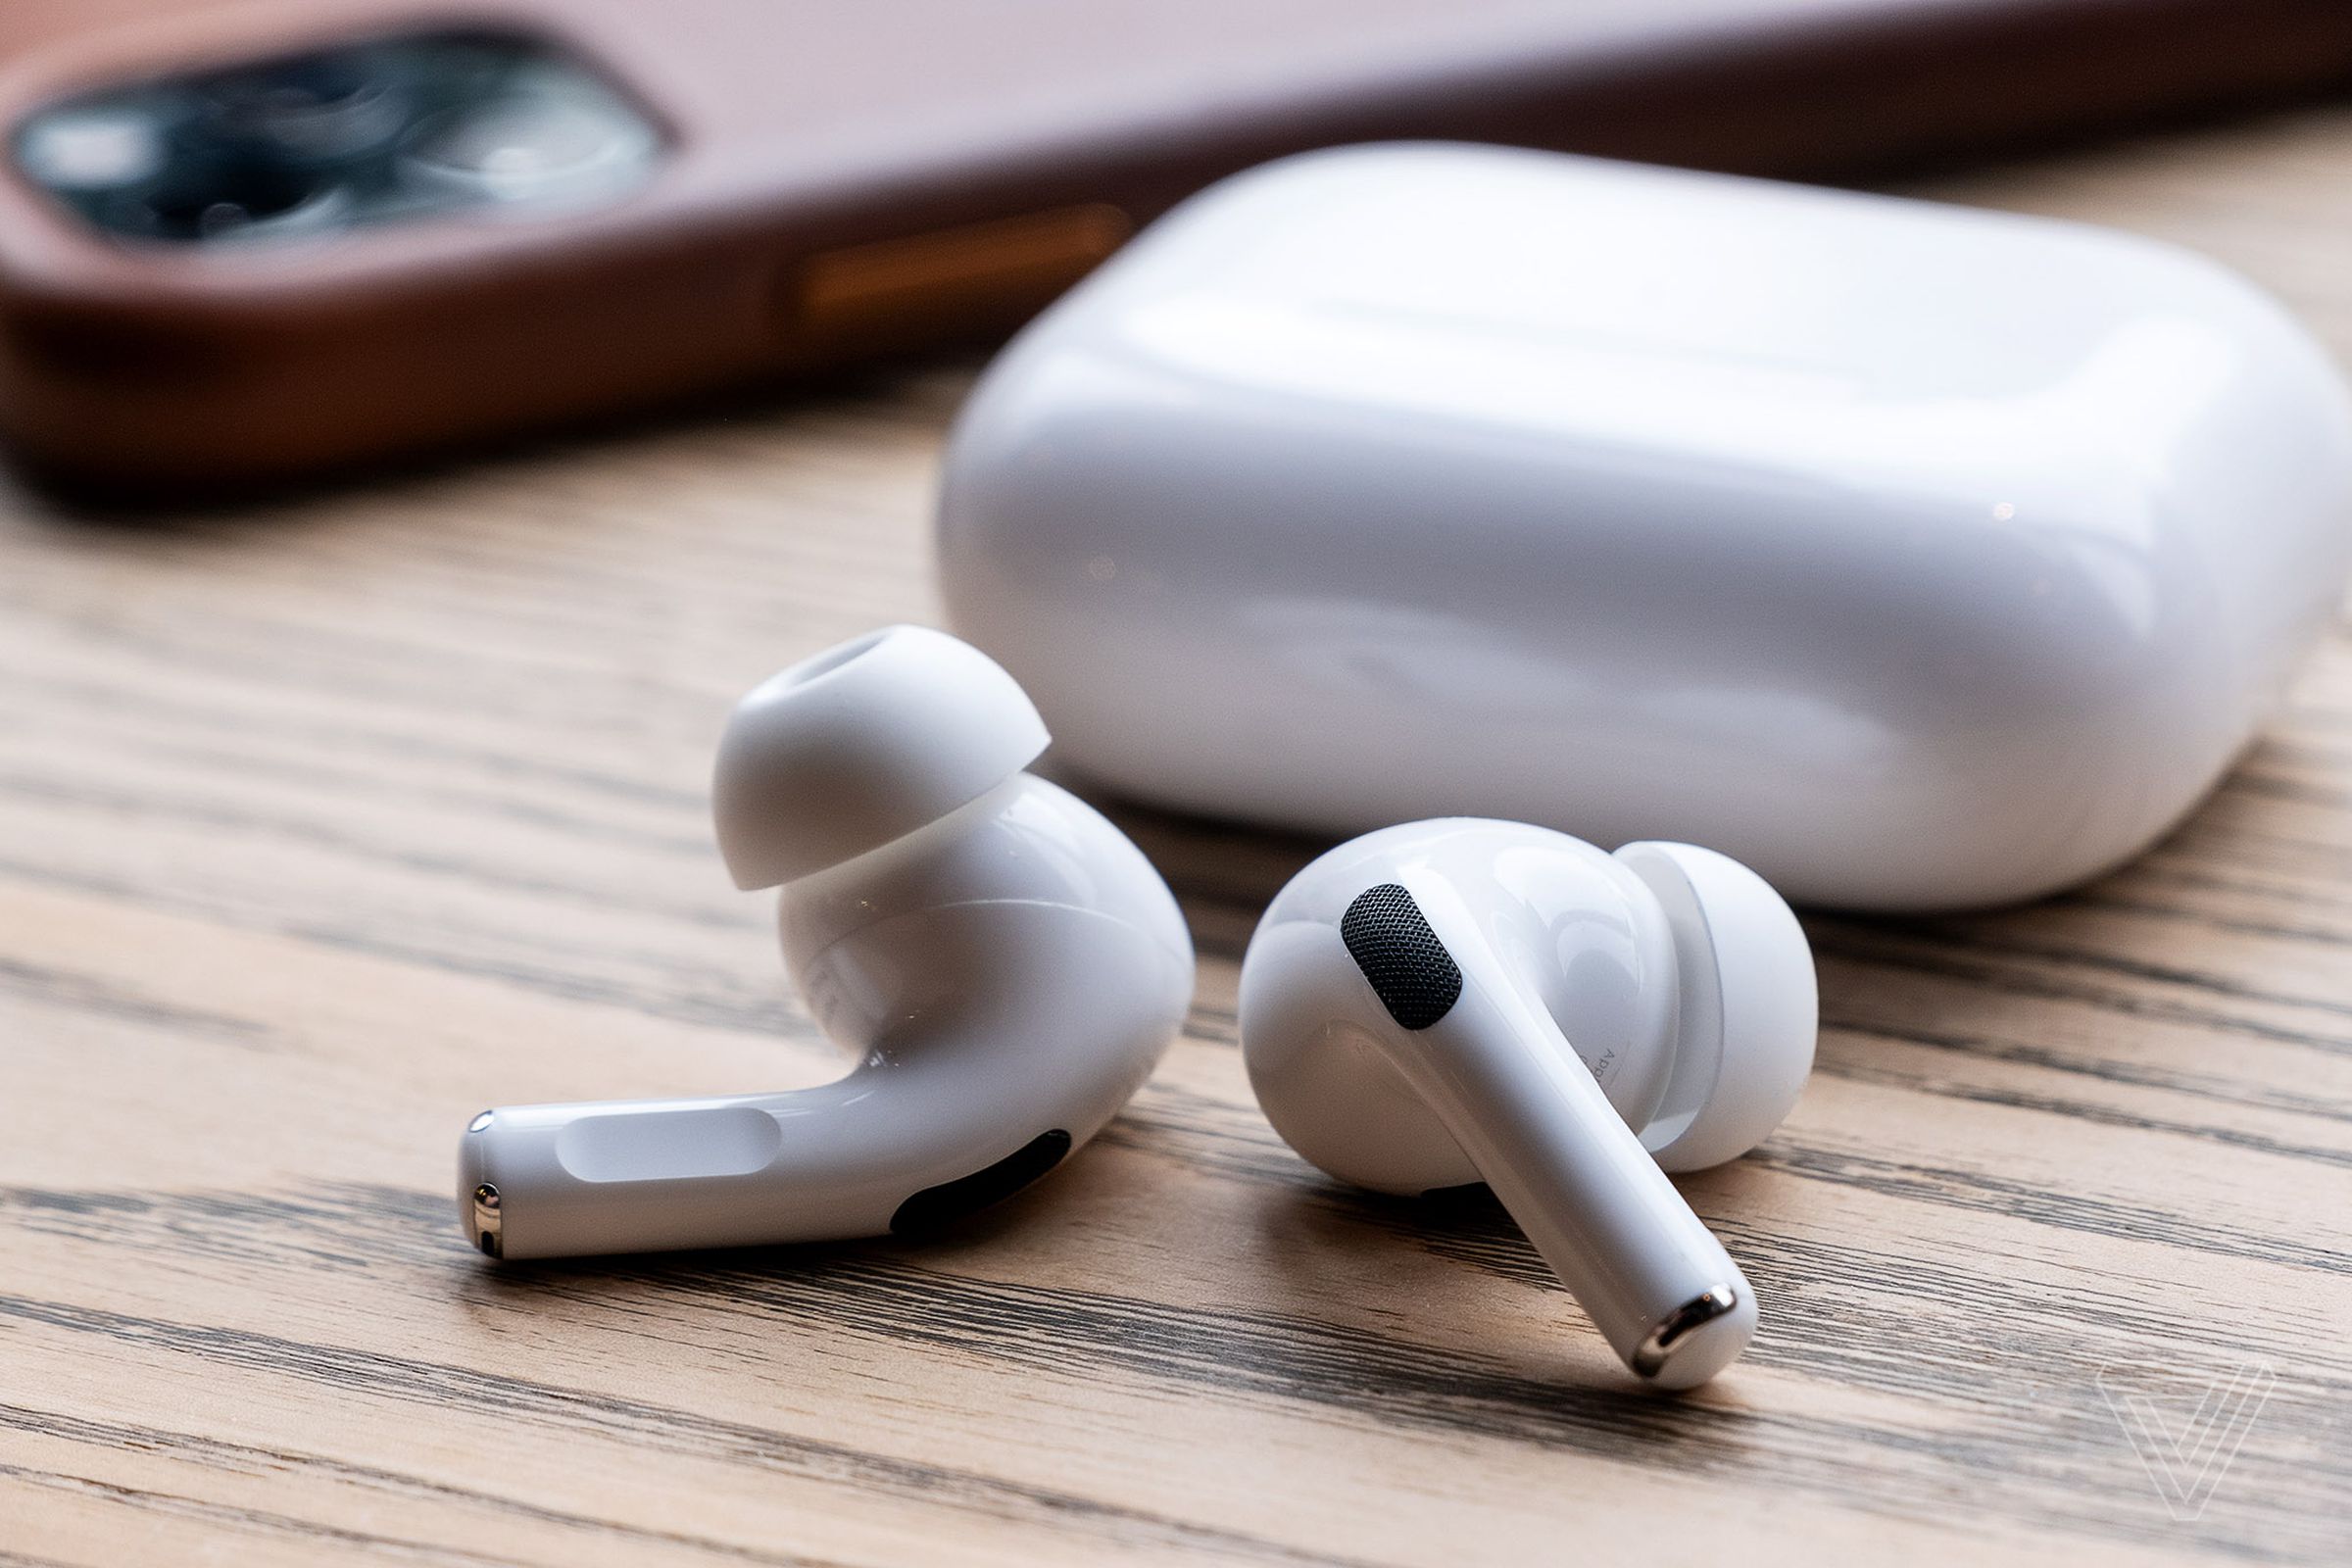 Amazon is selling Apple’s AirPods Pro for just $169.99.